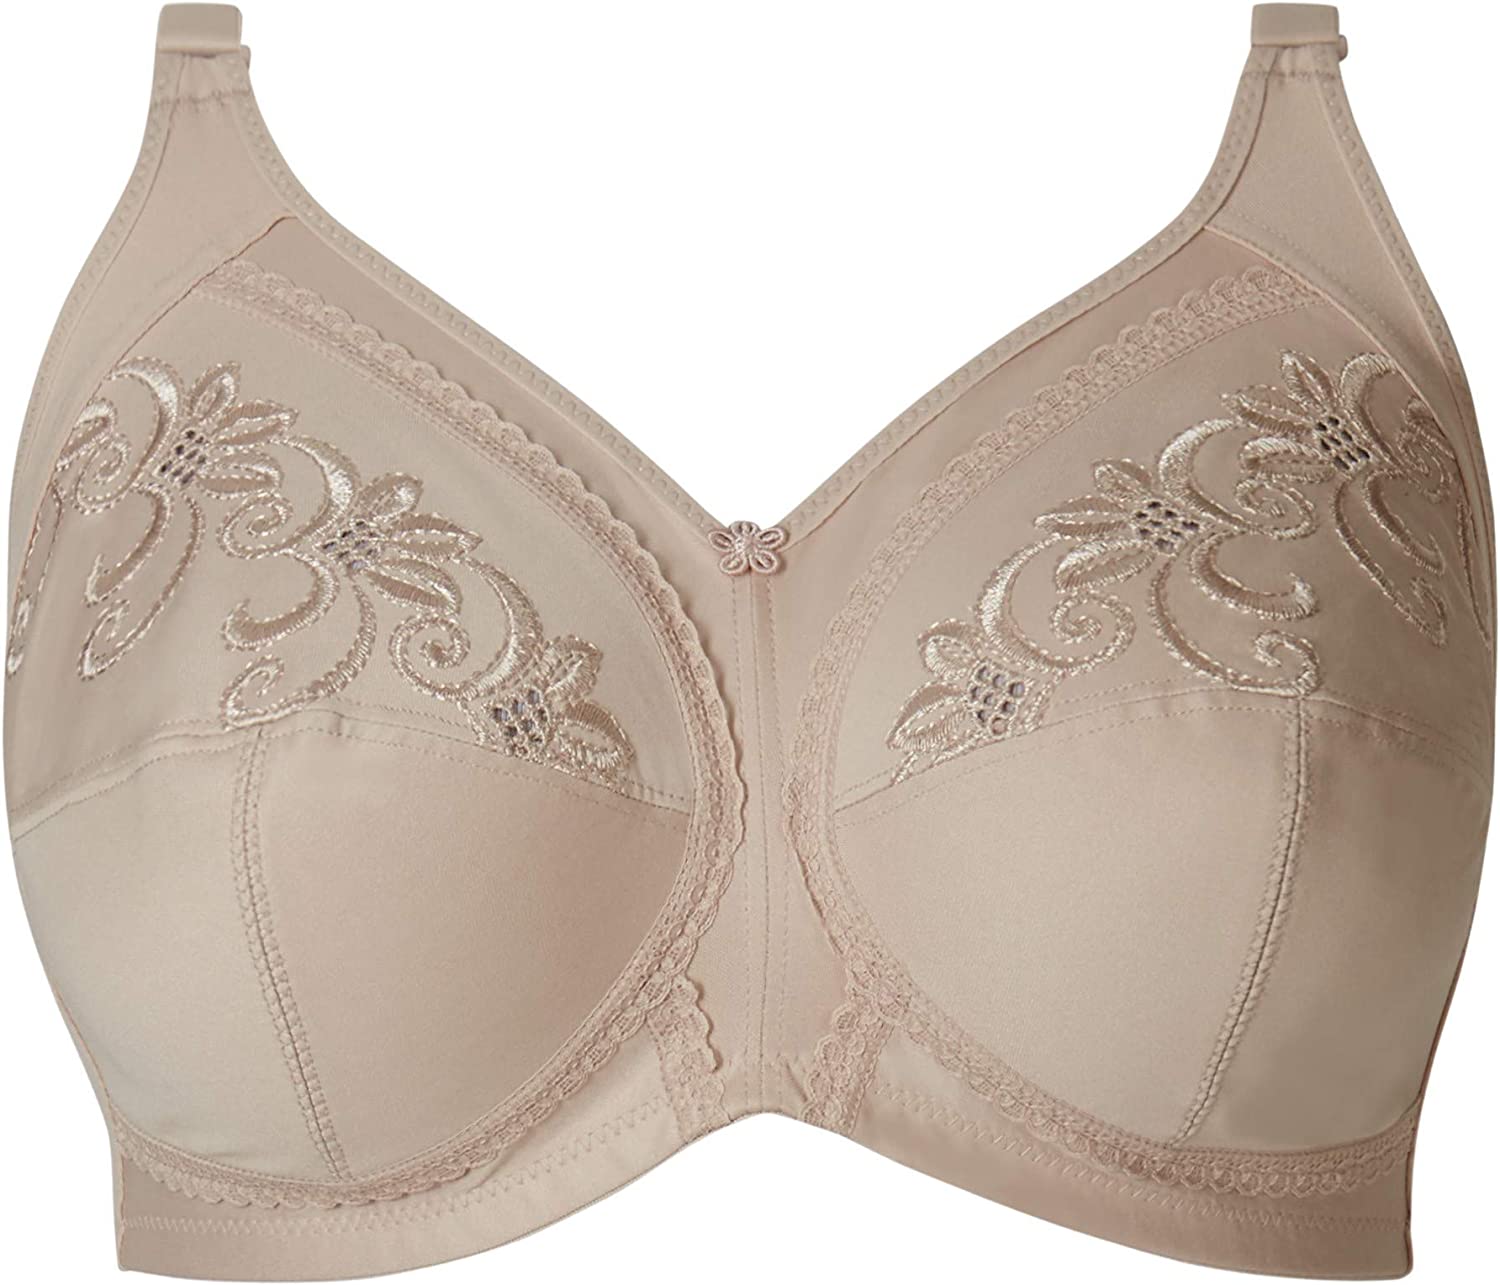 Marks & Spencer Women's Embroidered Total Support Non Wired Full Cup Bra -  Almond 